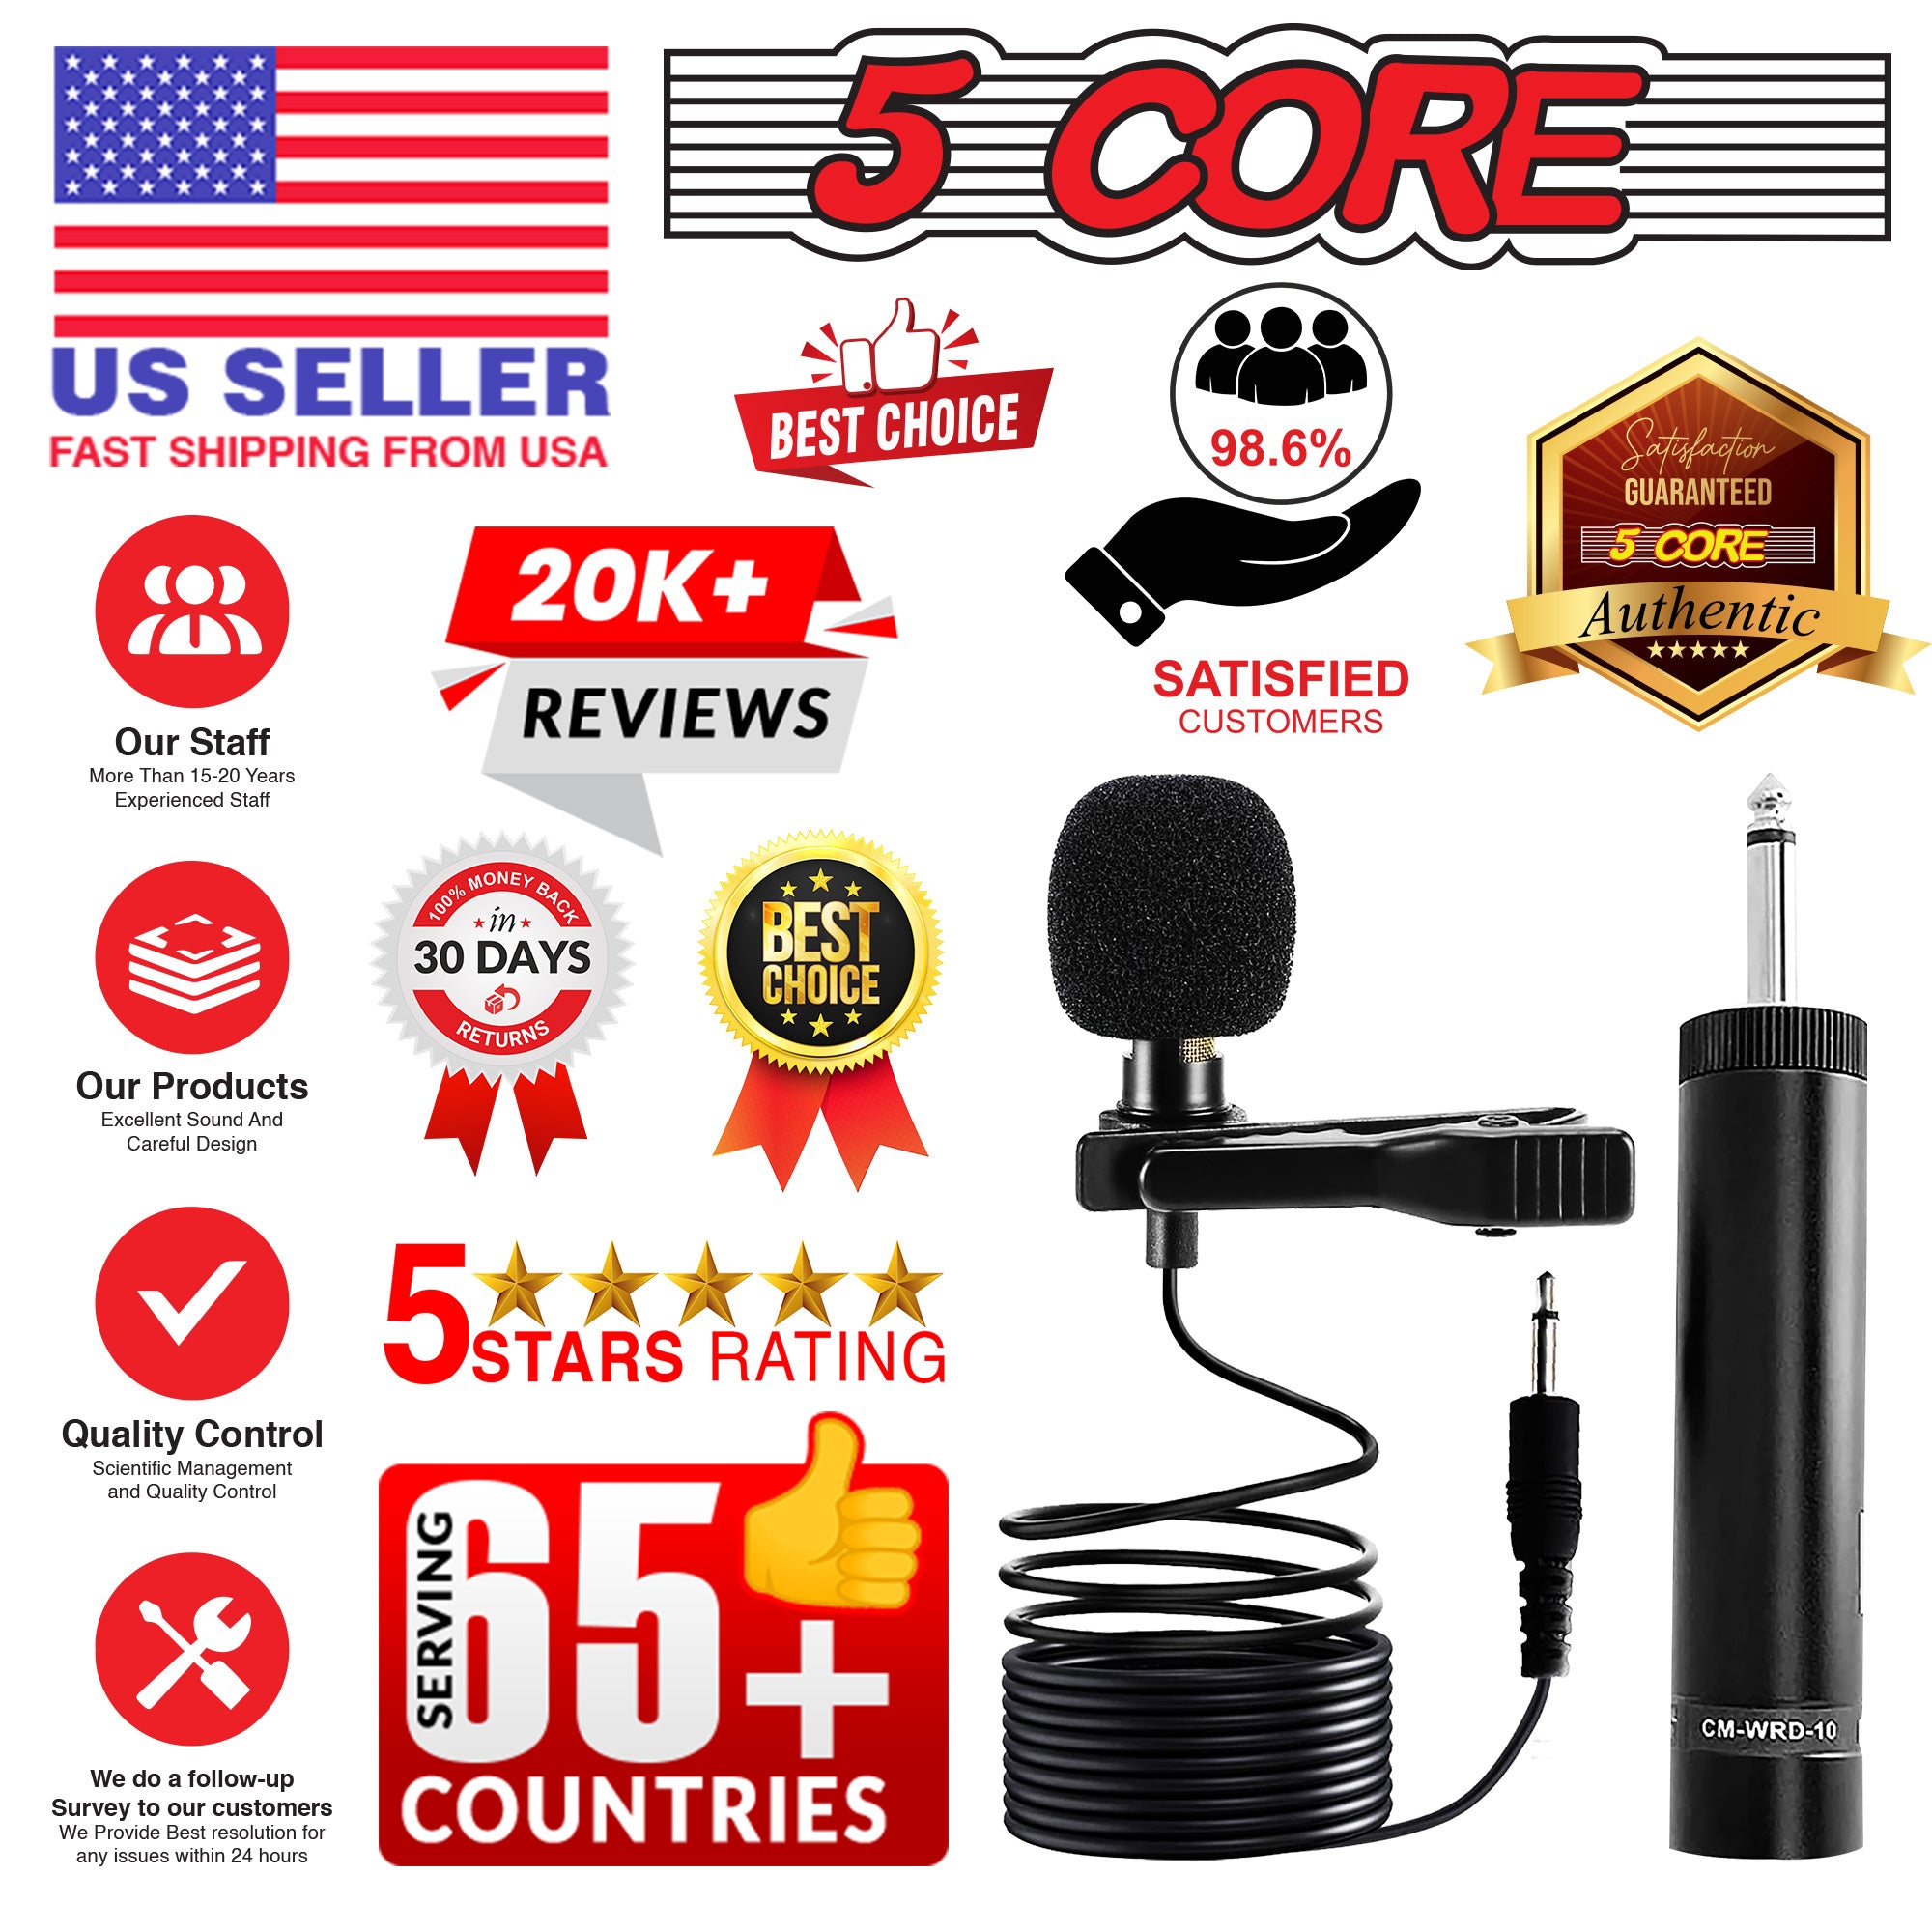 5 Core Lavalier Microphone for iPhone & Tablet External Clip On Mini Lapel Mic for Video Recording & Vlogging with 3.5mm Connector -MIC WRD 10